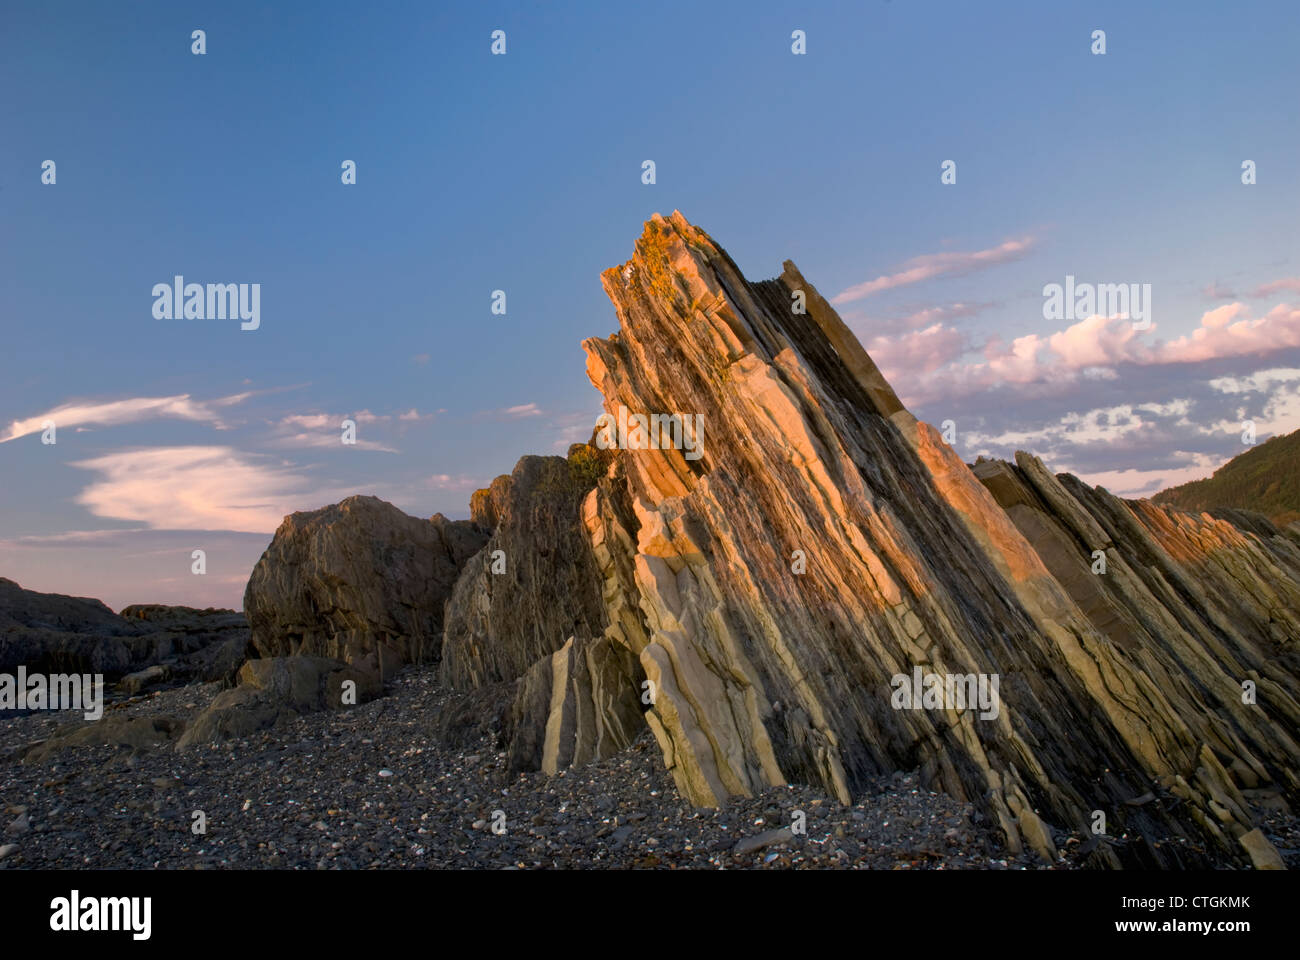 Layered Rock In The Sunset Light; La Martre, Quebec, Canada Stock Photo